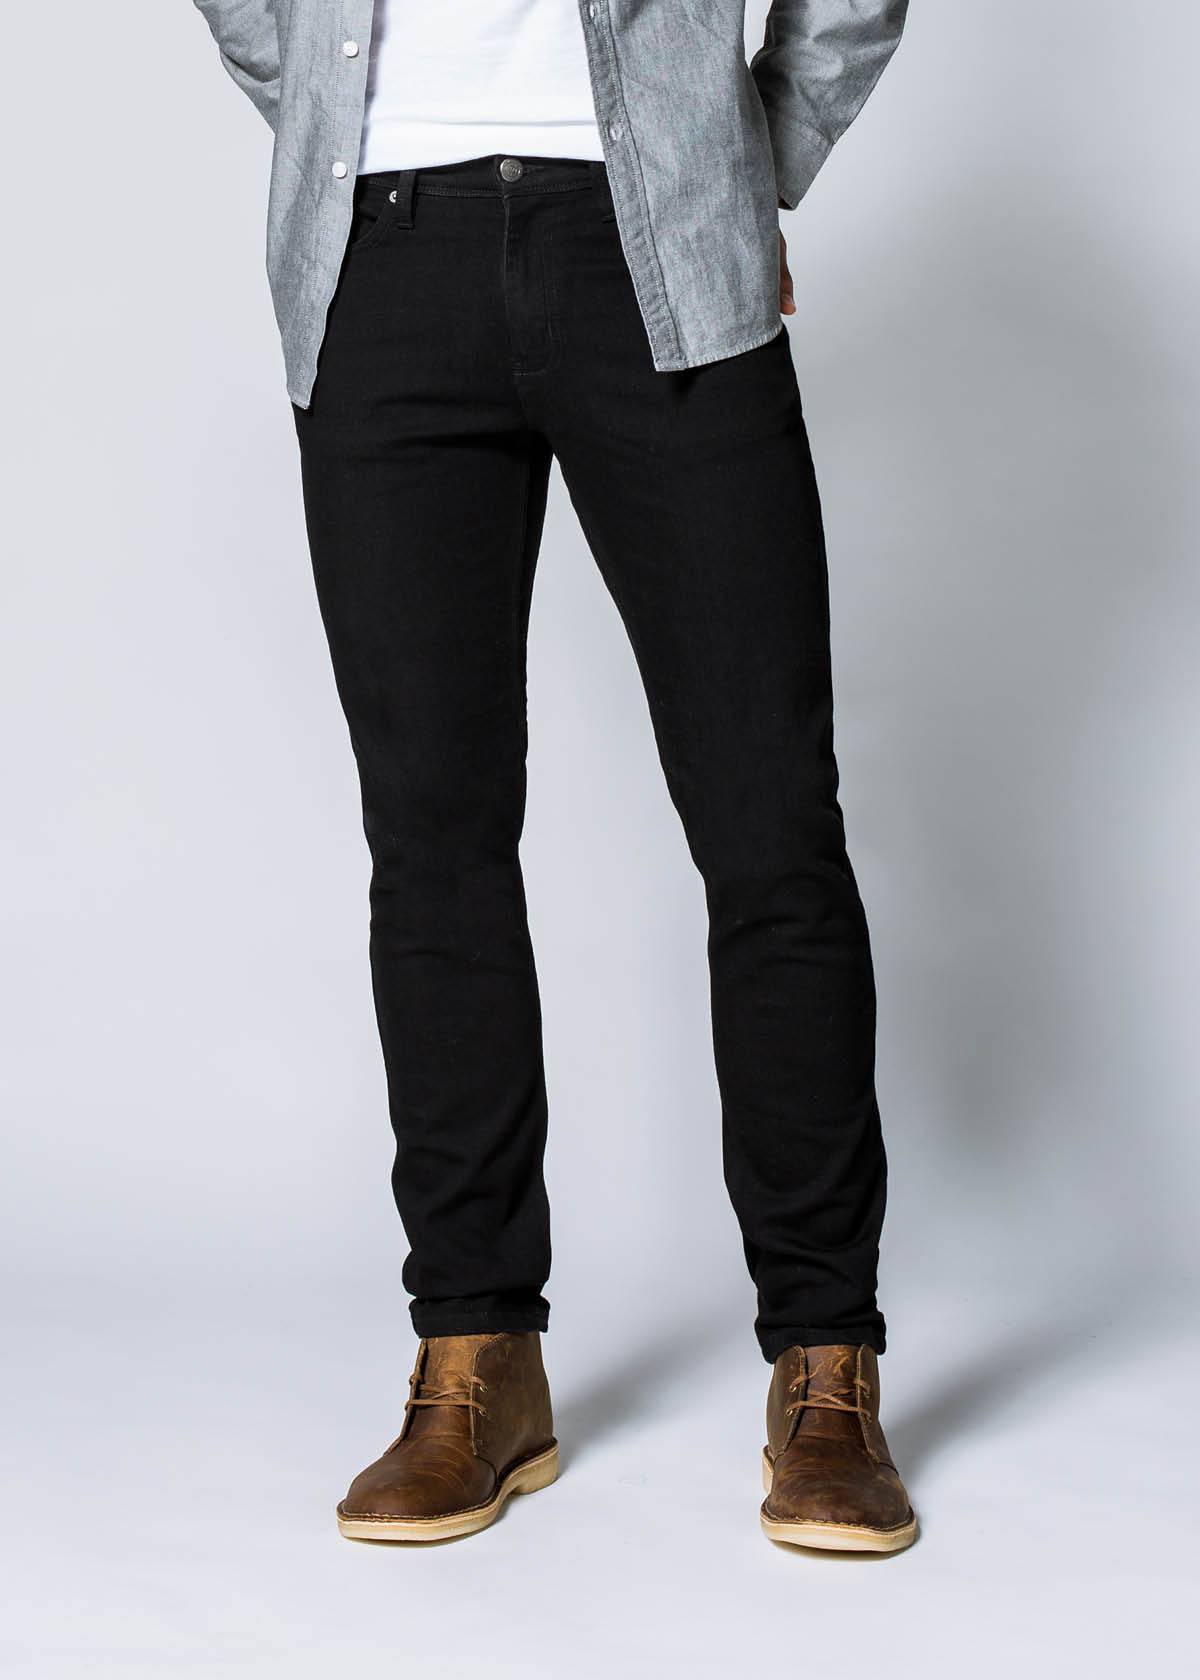 DUER Performance Denim Relaxed Fit Tapered Jeans - Men's | REI Co-op |  Tapered jeans men, Relaxed fit jeans, Jeans fit